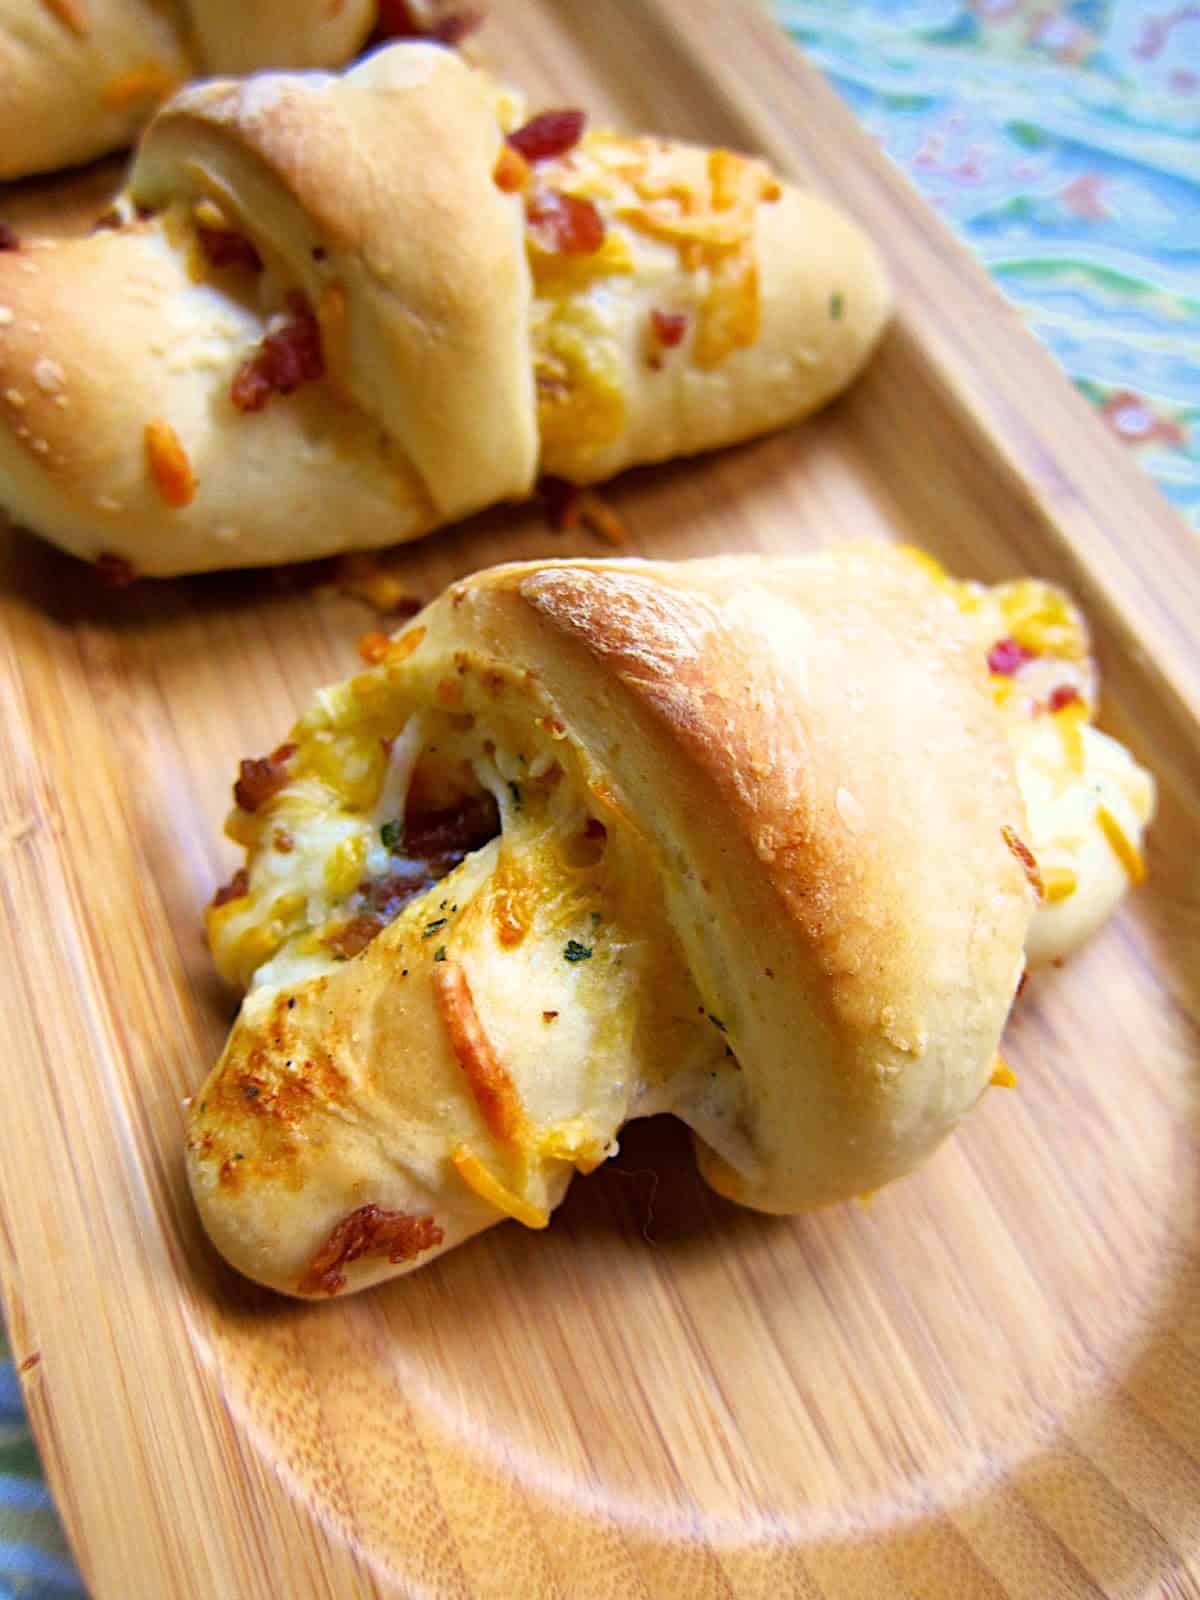 CRACK Crescents - Cheddar Bacon Ranch Crescents  - frozen rolls stuffed with cheddar, bacon and ranch! OMG! These are to-die-for!!! Great for breakfast, side dish or an appetizer!!! Only 5 ingredients in this easy bread recipe.